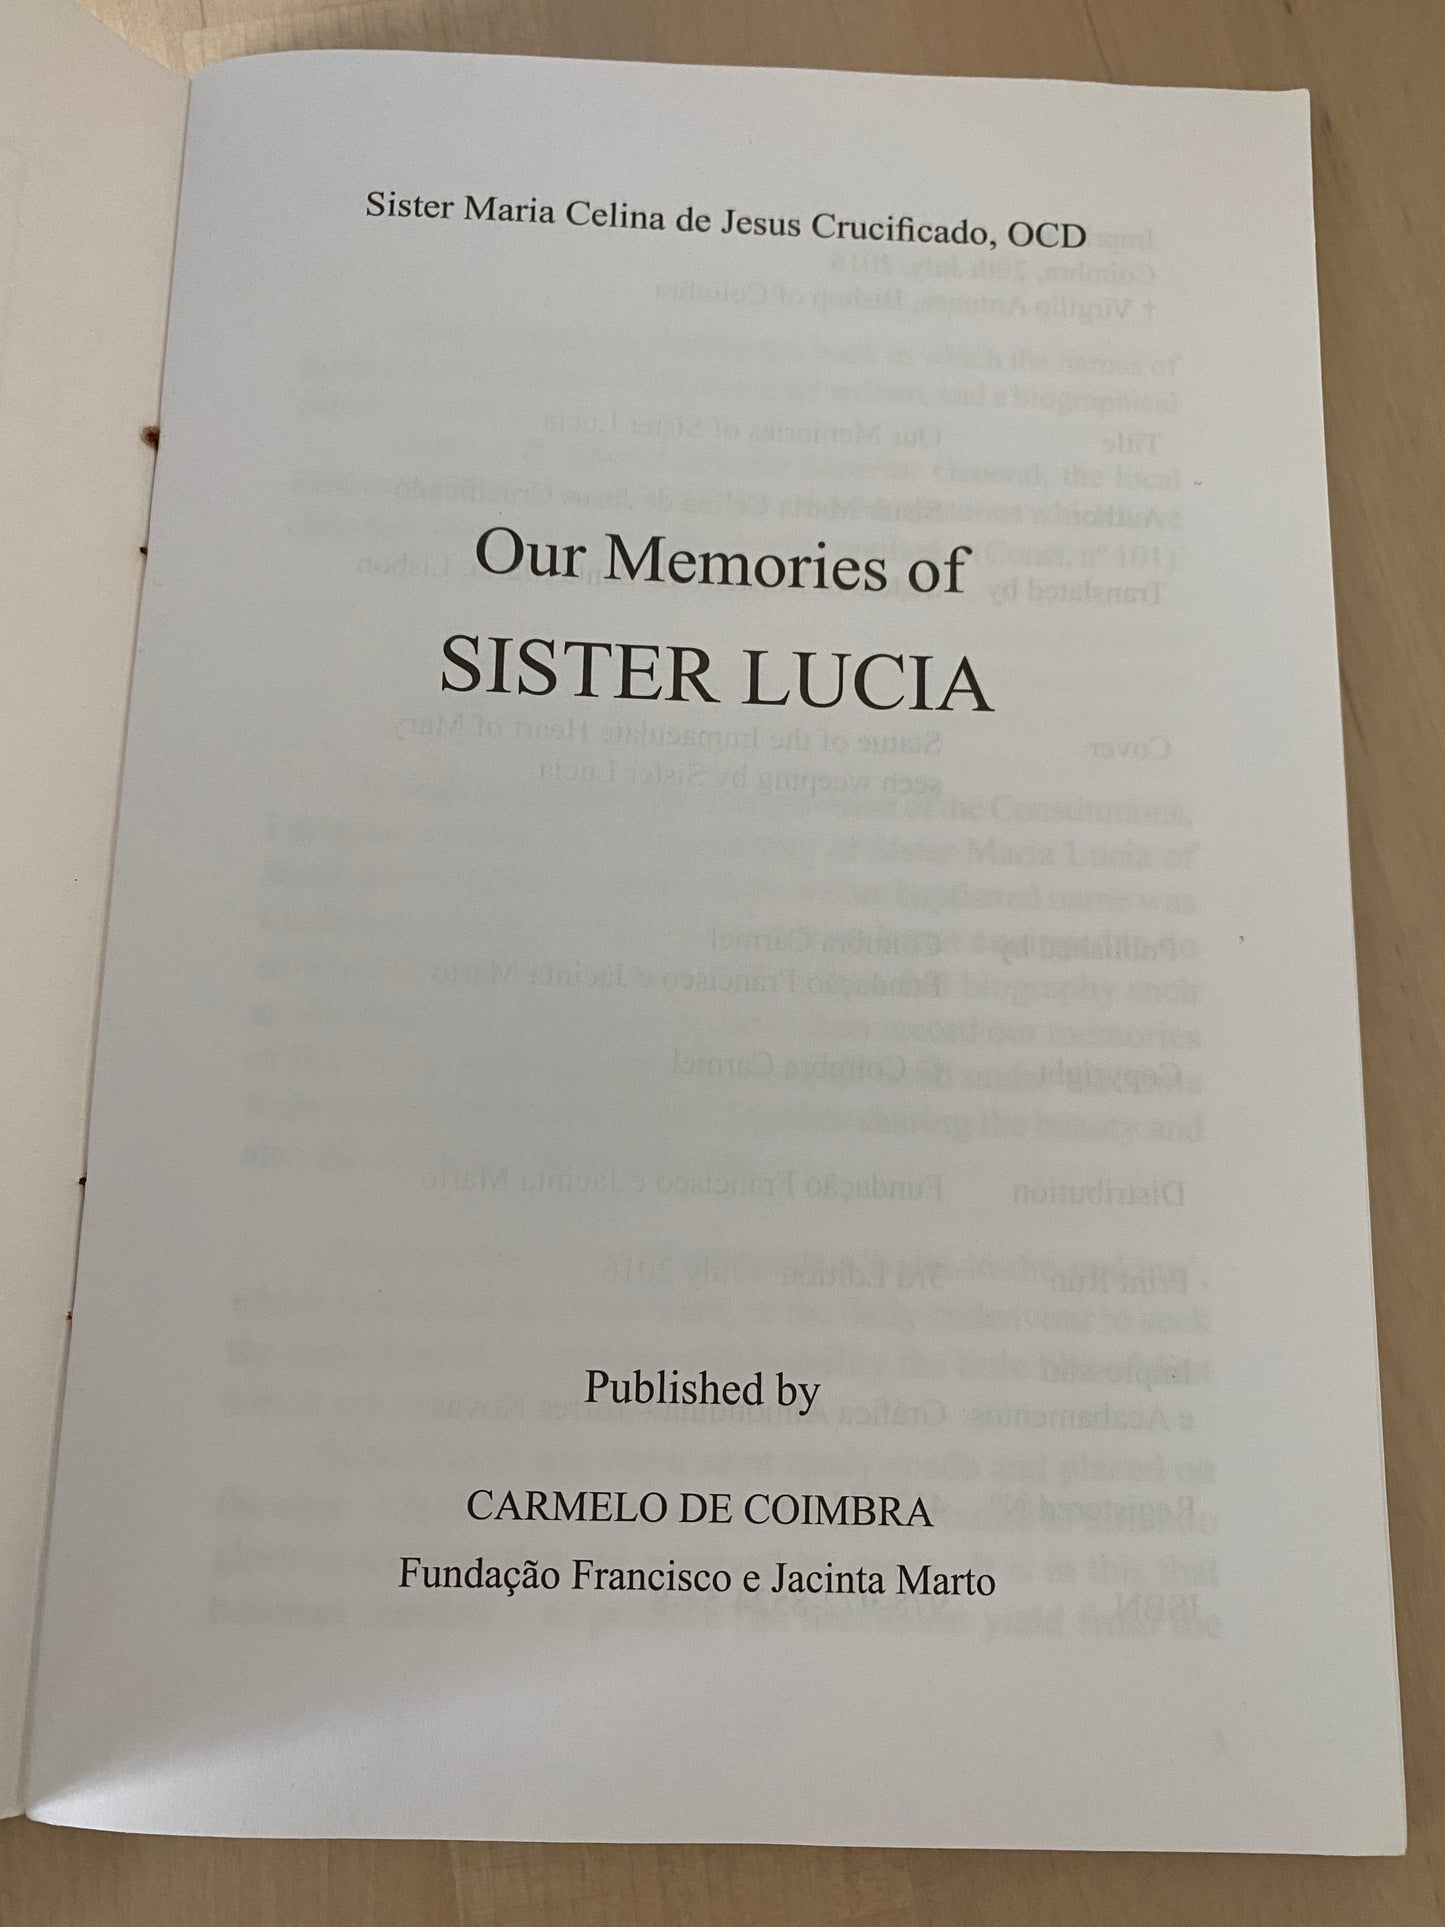 Our memories of sister lucia